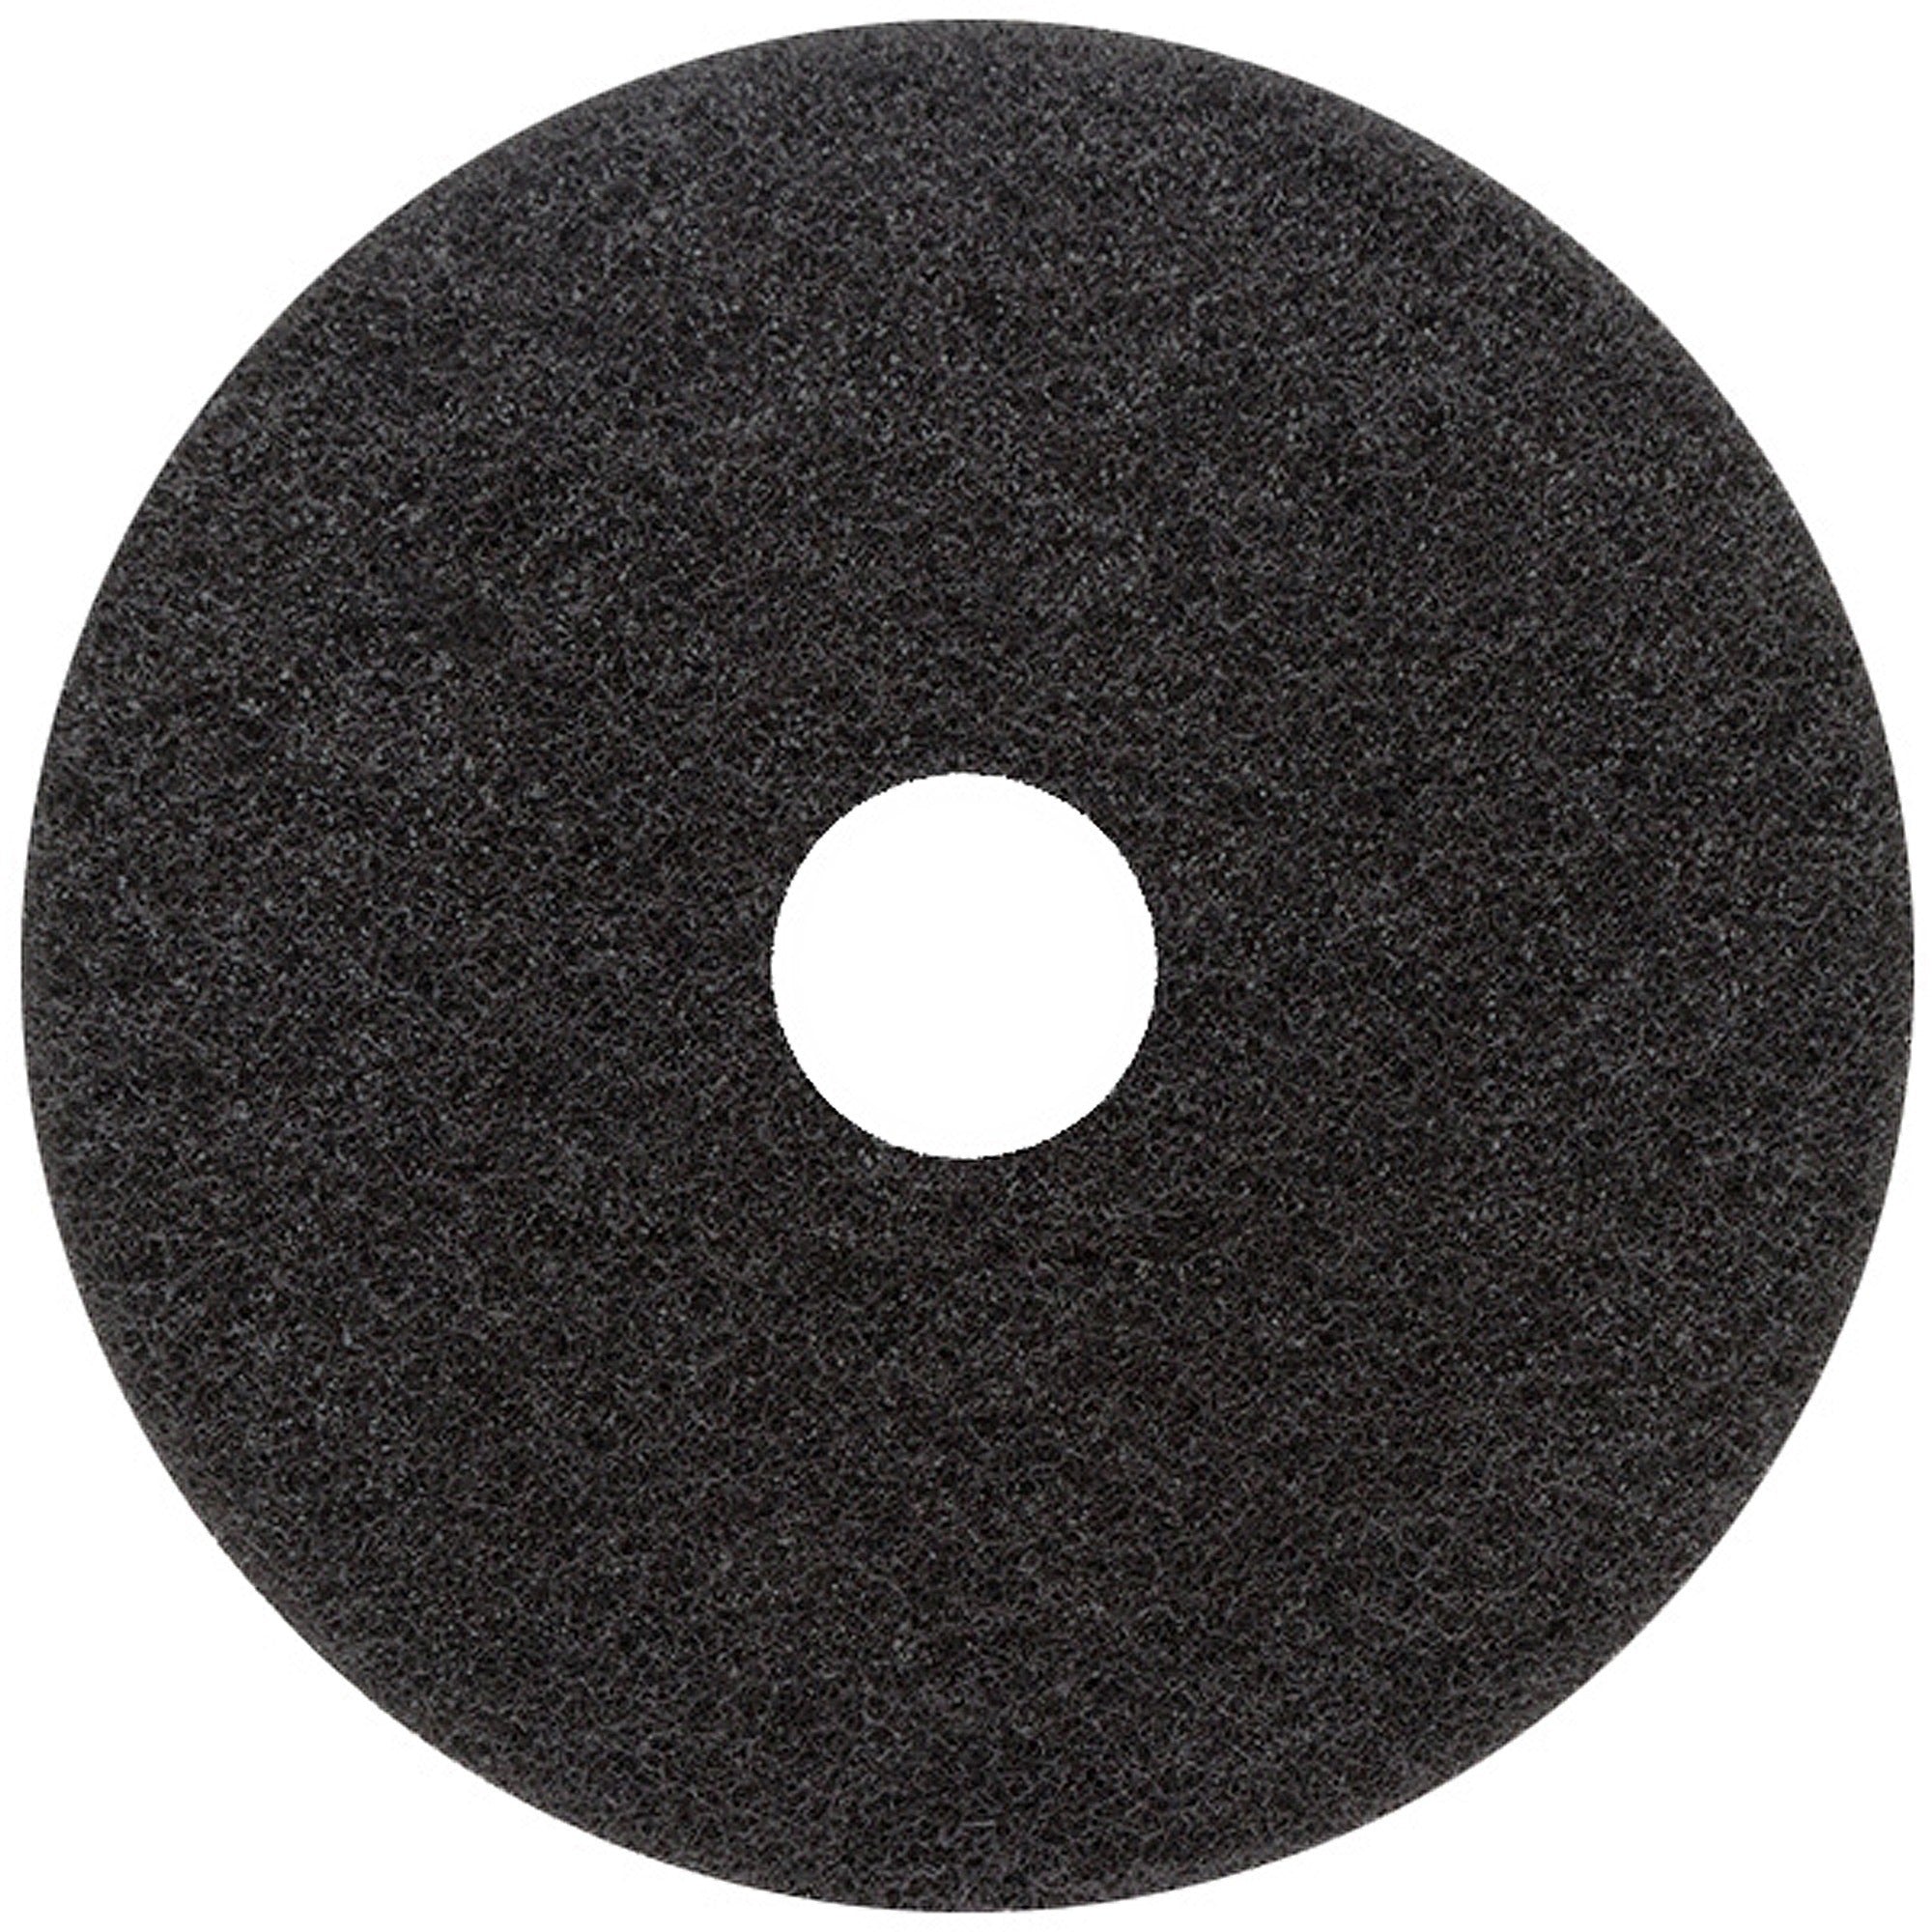 genuine-joe-black-floor-stripping-pad-5-carton-round-x-18-diameter-stripping-175-rpm-to-350-rpm-speed-supported-heavy-duty-resilient-flexible-long-lasting-fiber-black_gjo18404 - 1